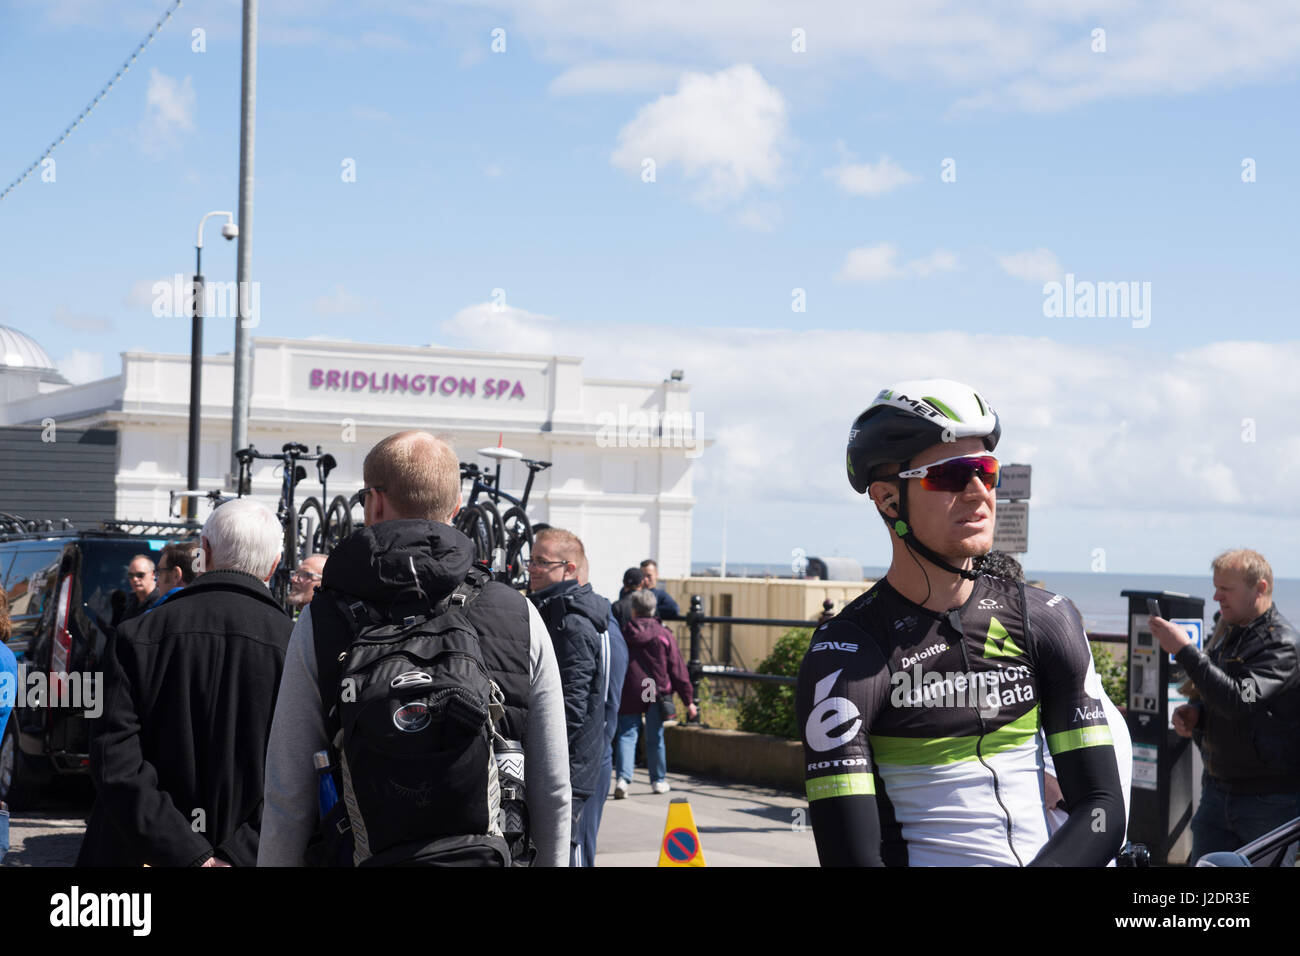 Bridlington, UK. 28th Apr, 2017. The cycle Teams get ready in front of the Bridlington Spa Credit: Richard Smith/Alamy Live News Stock Photo